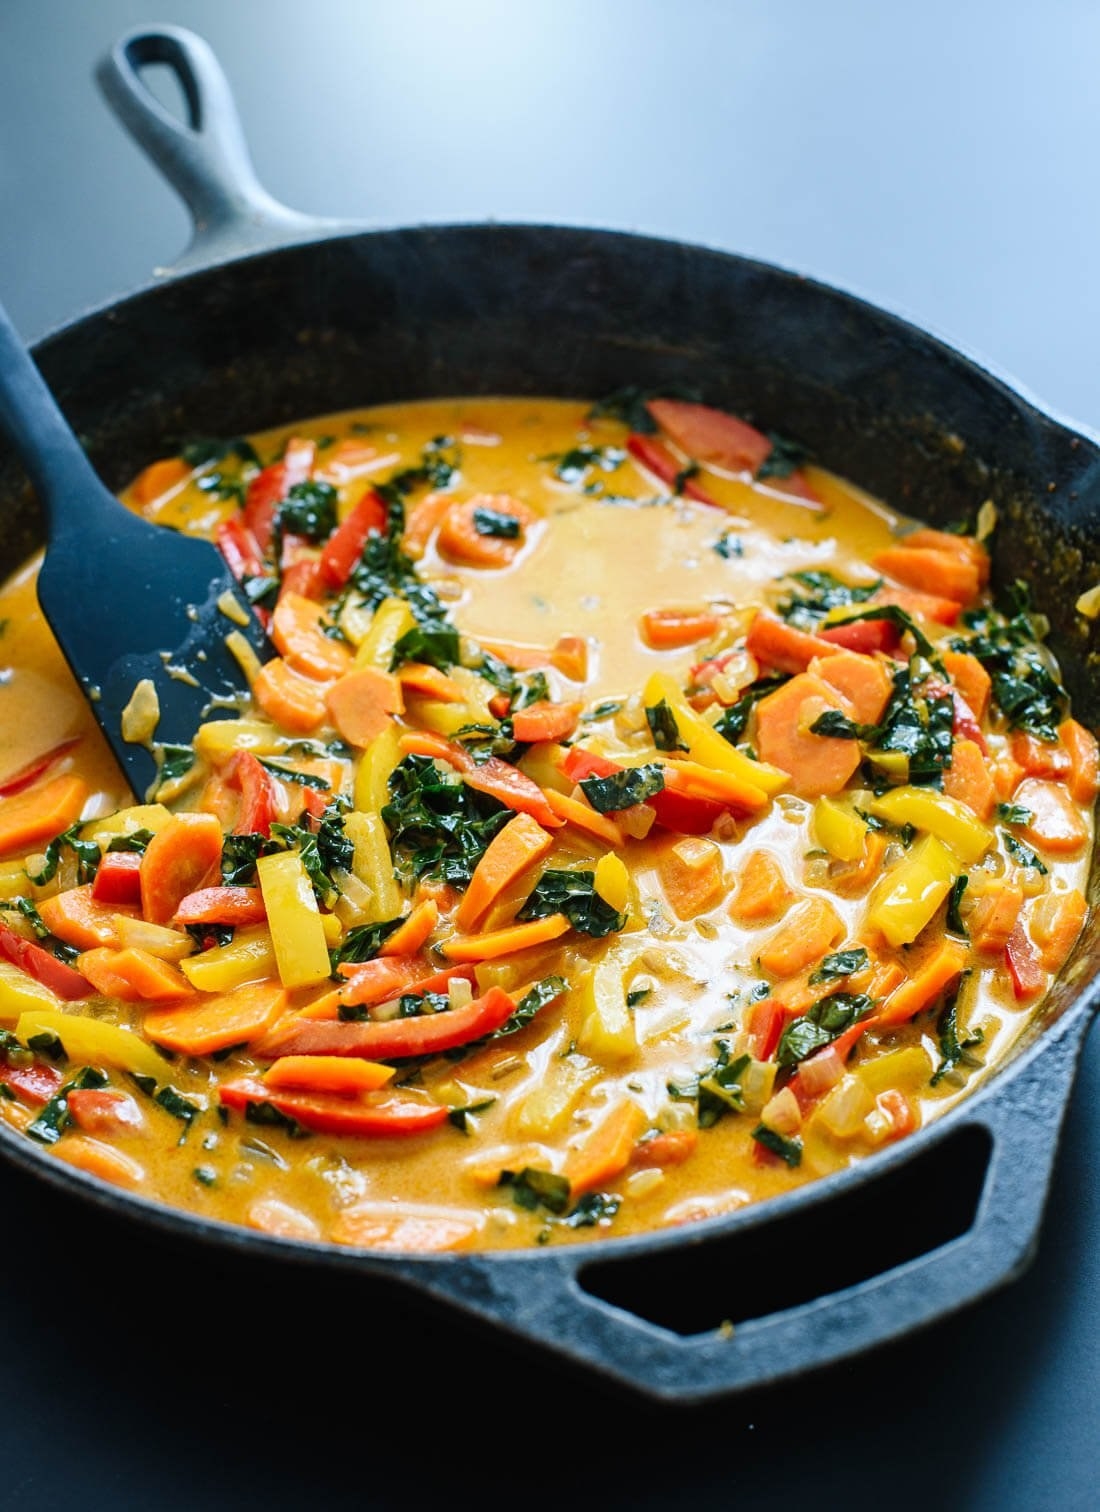 A skillet of red curry with vegetables.